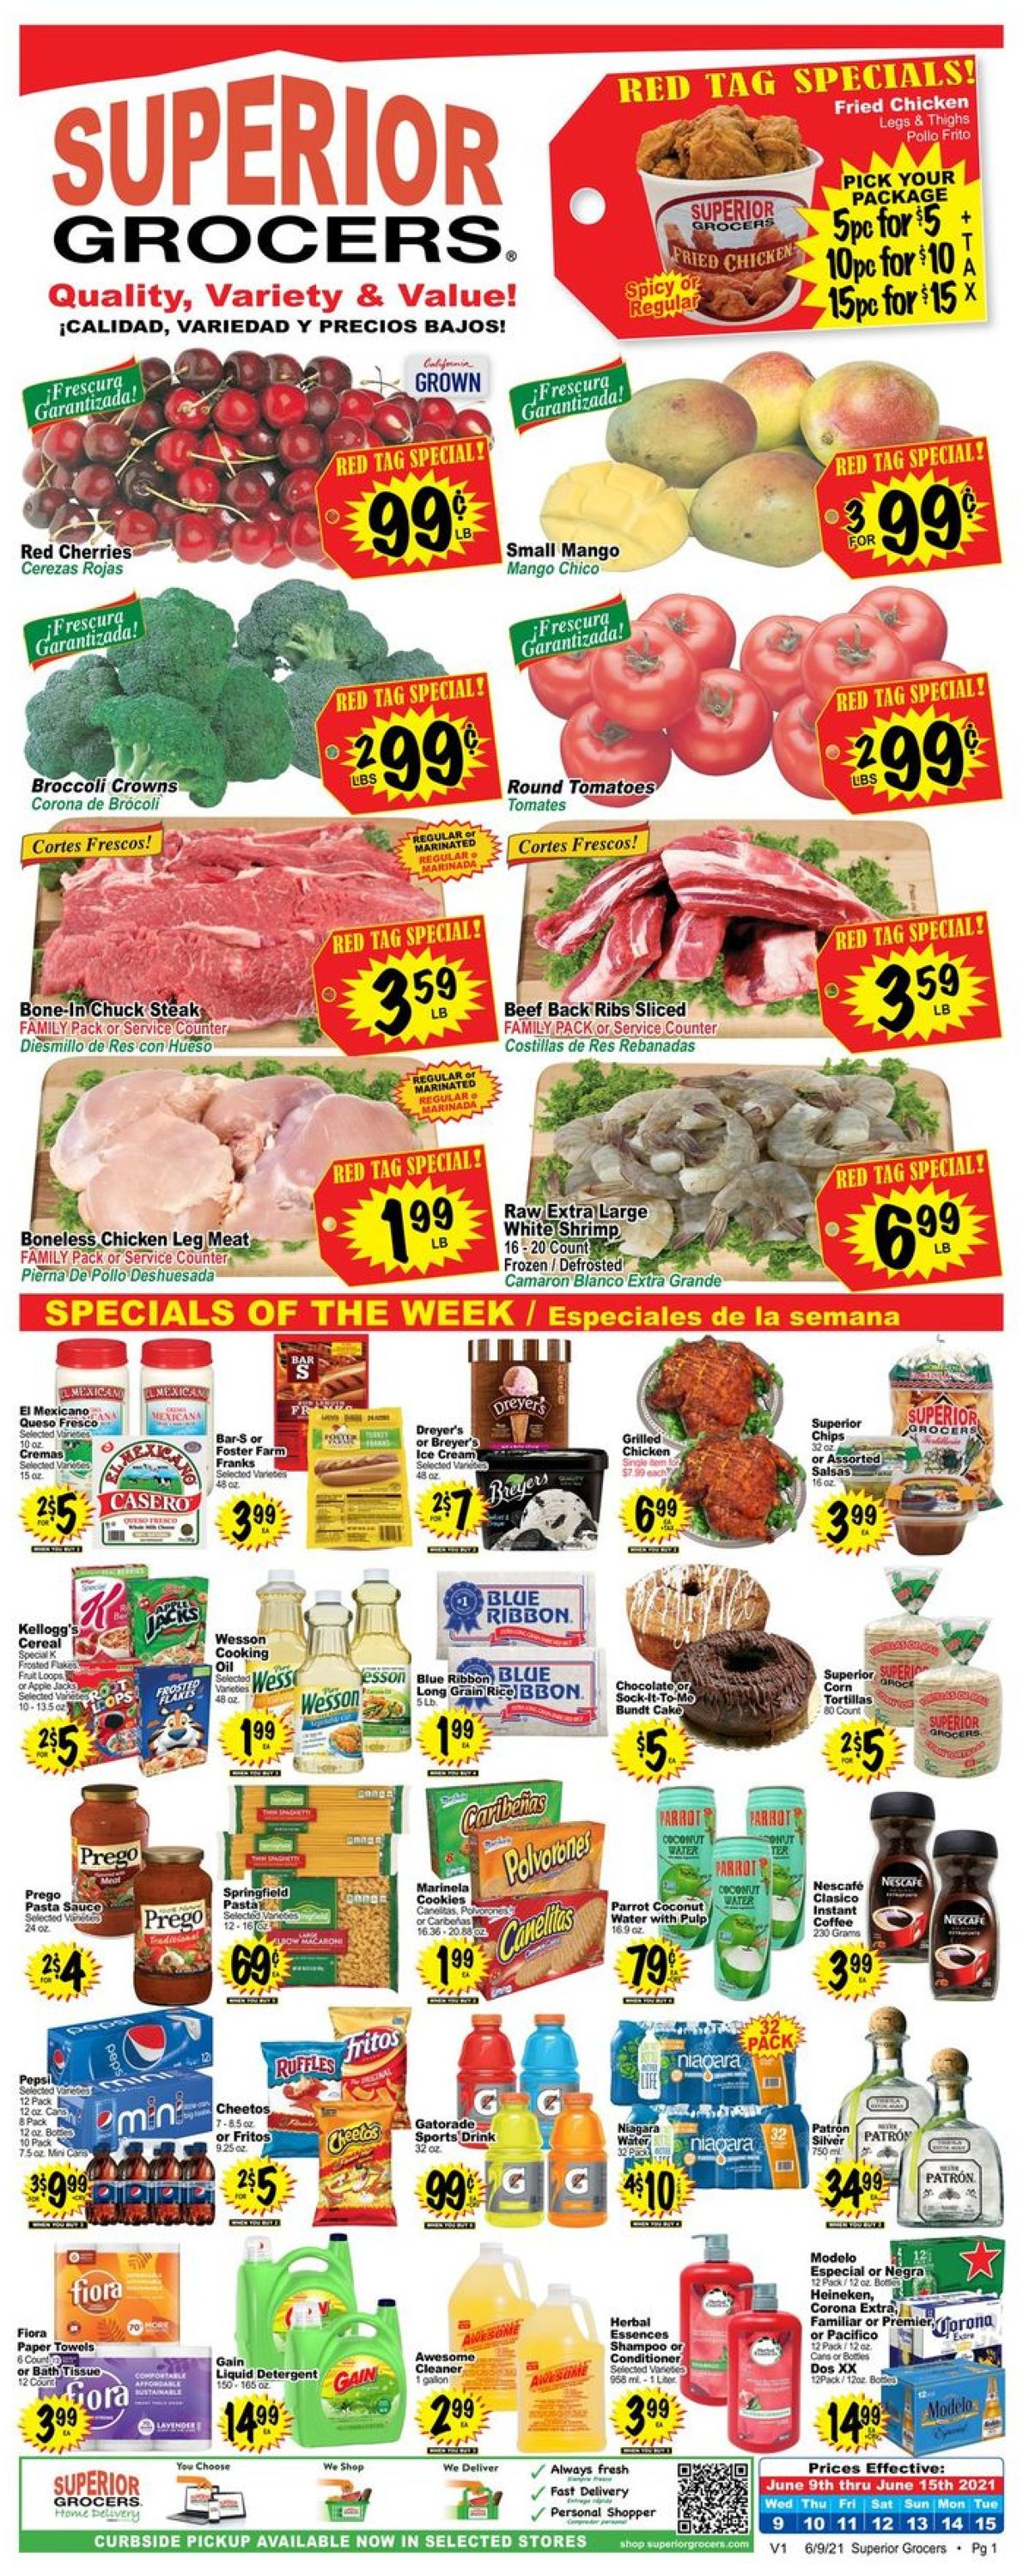 Superior Grocers Current weekly ad 06/09 - 06/15/2021 - frequent-ads.com